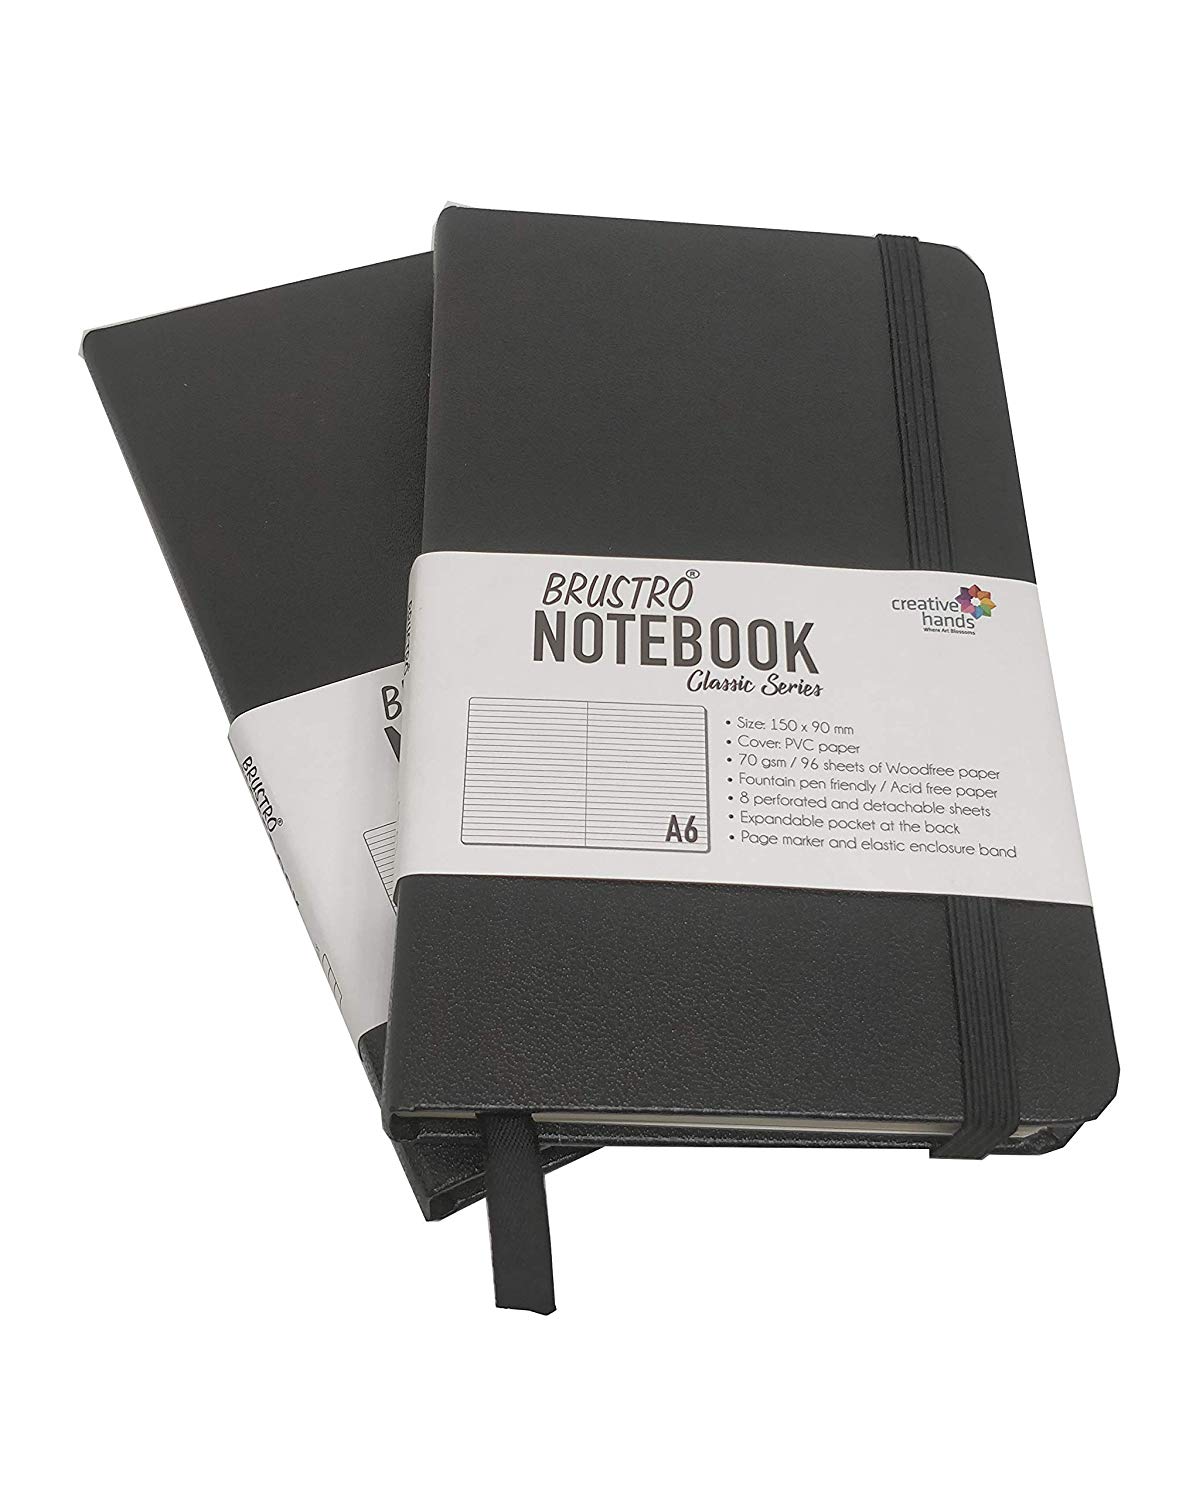 BRUSTRO NOTEBOOK CLASSIC SERIES TWIN PACK A6